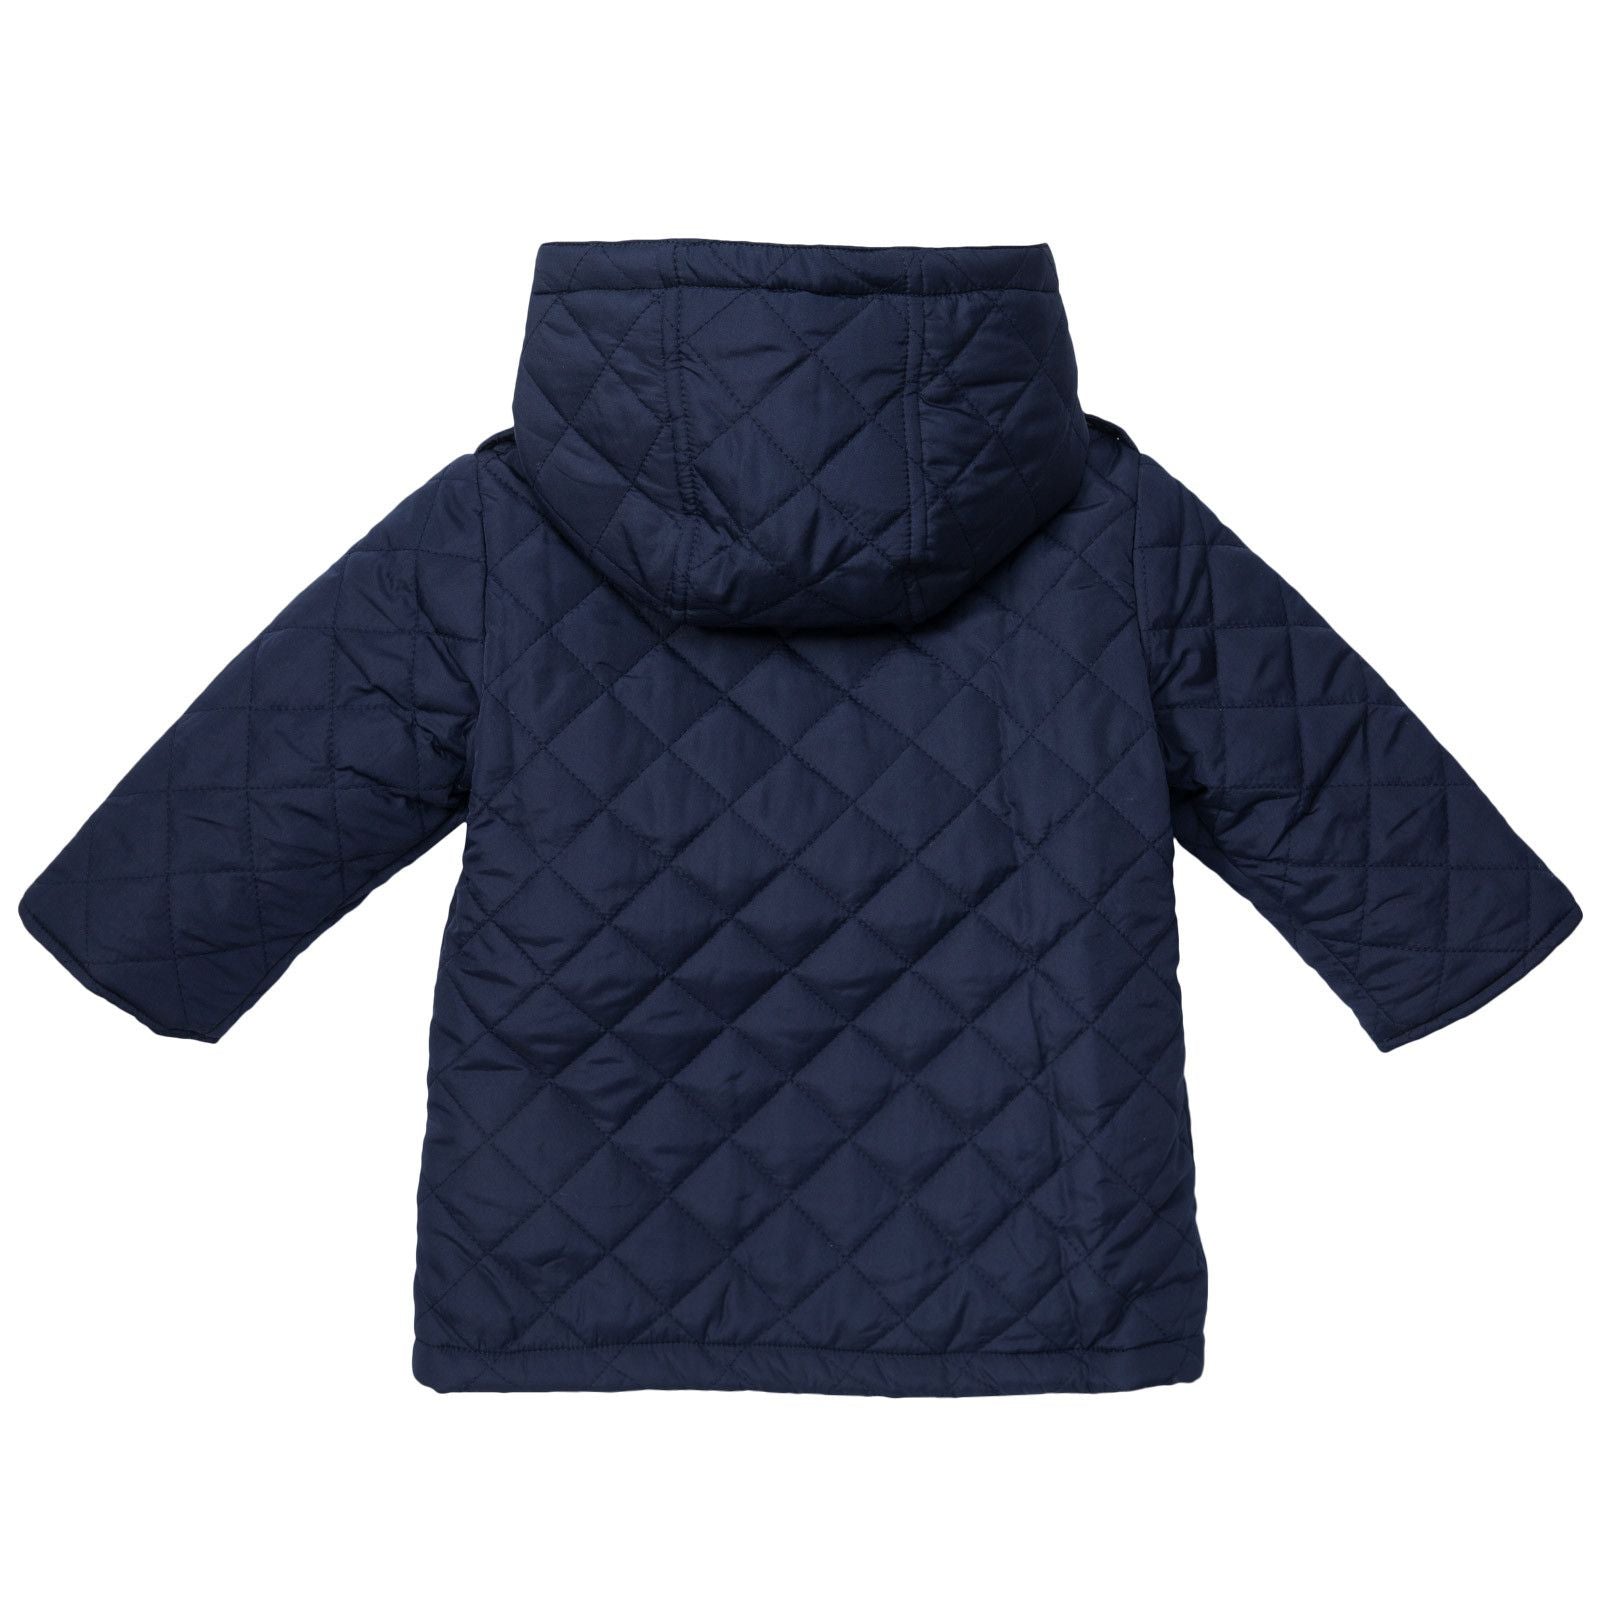 Baby Navy Blue Quilted Hooded Jacket - CÉMAROSE | Children's Fashion Store - 2